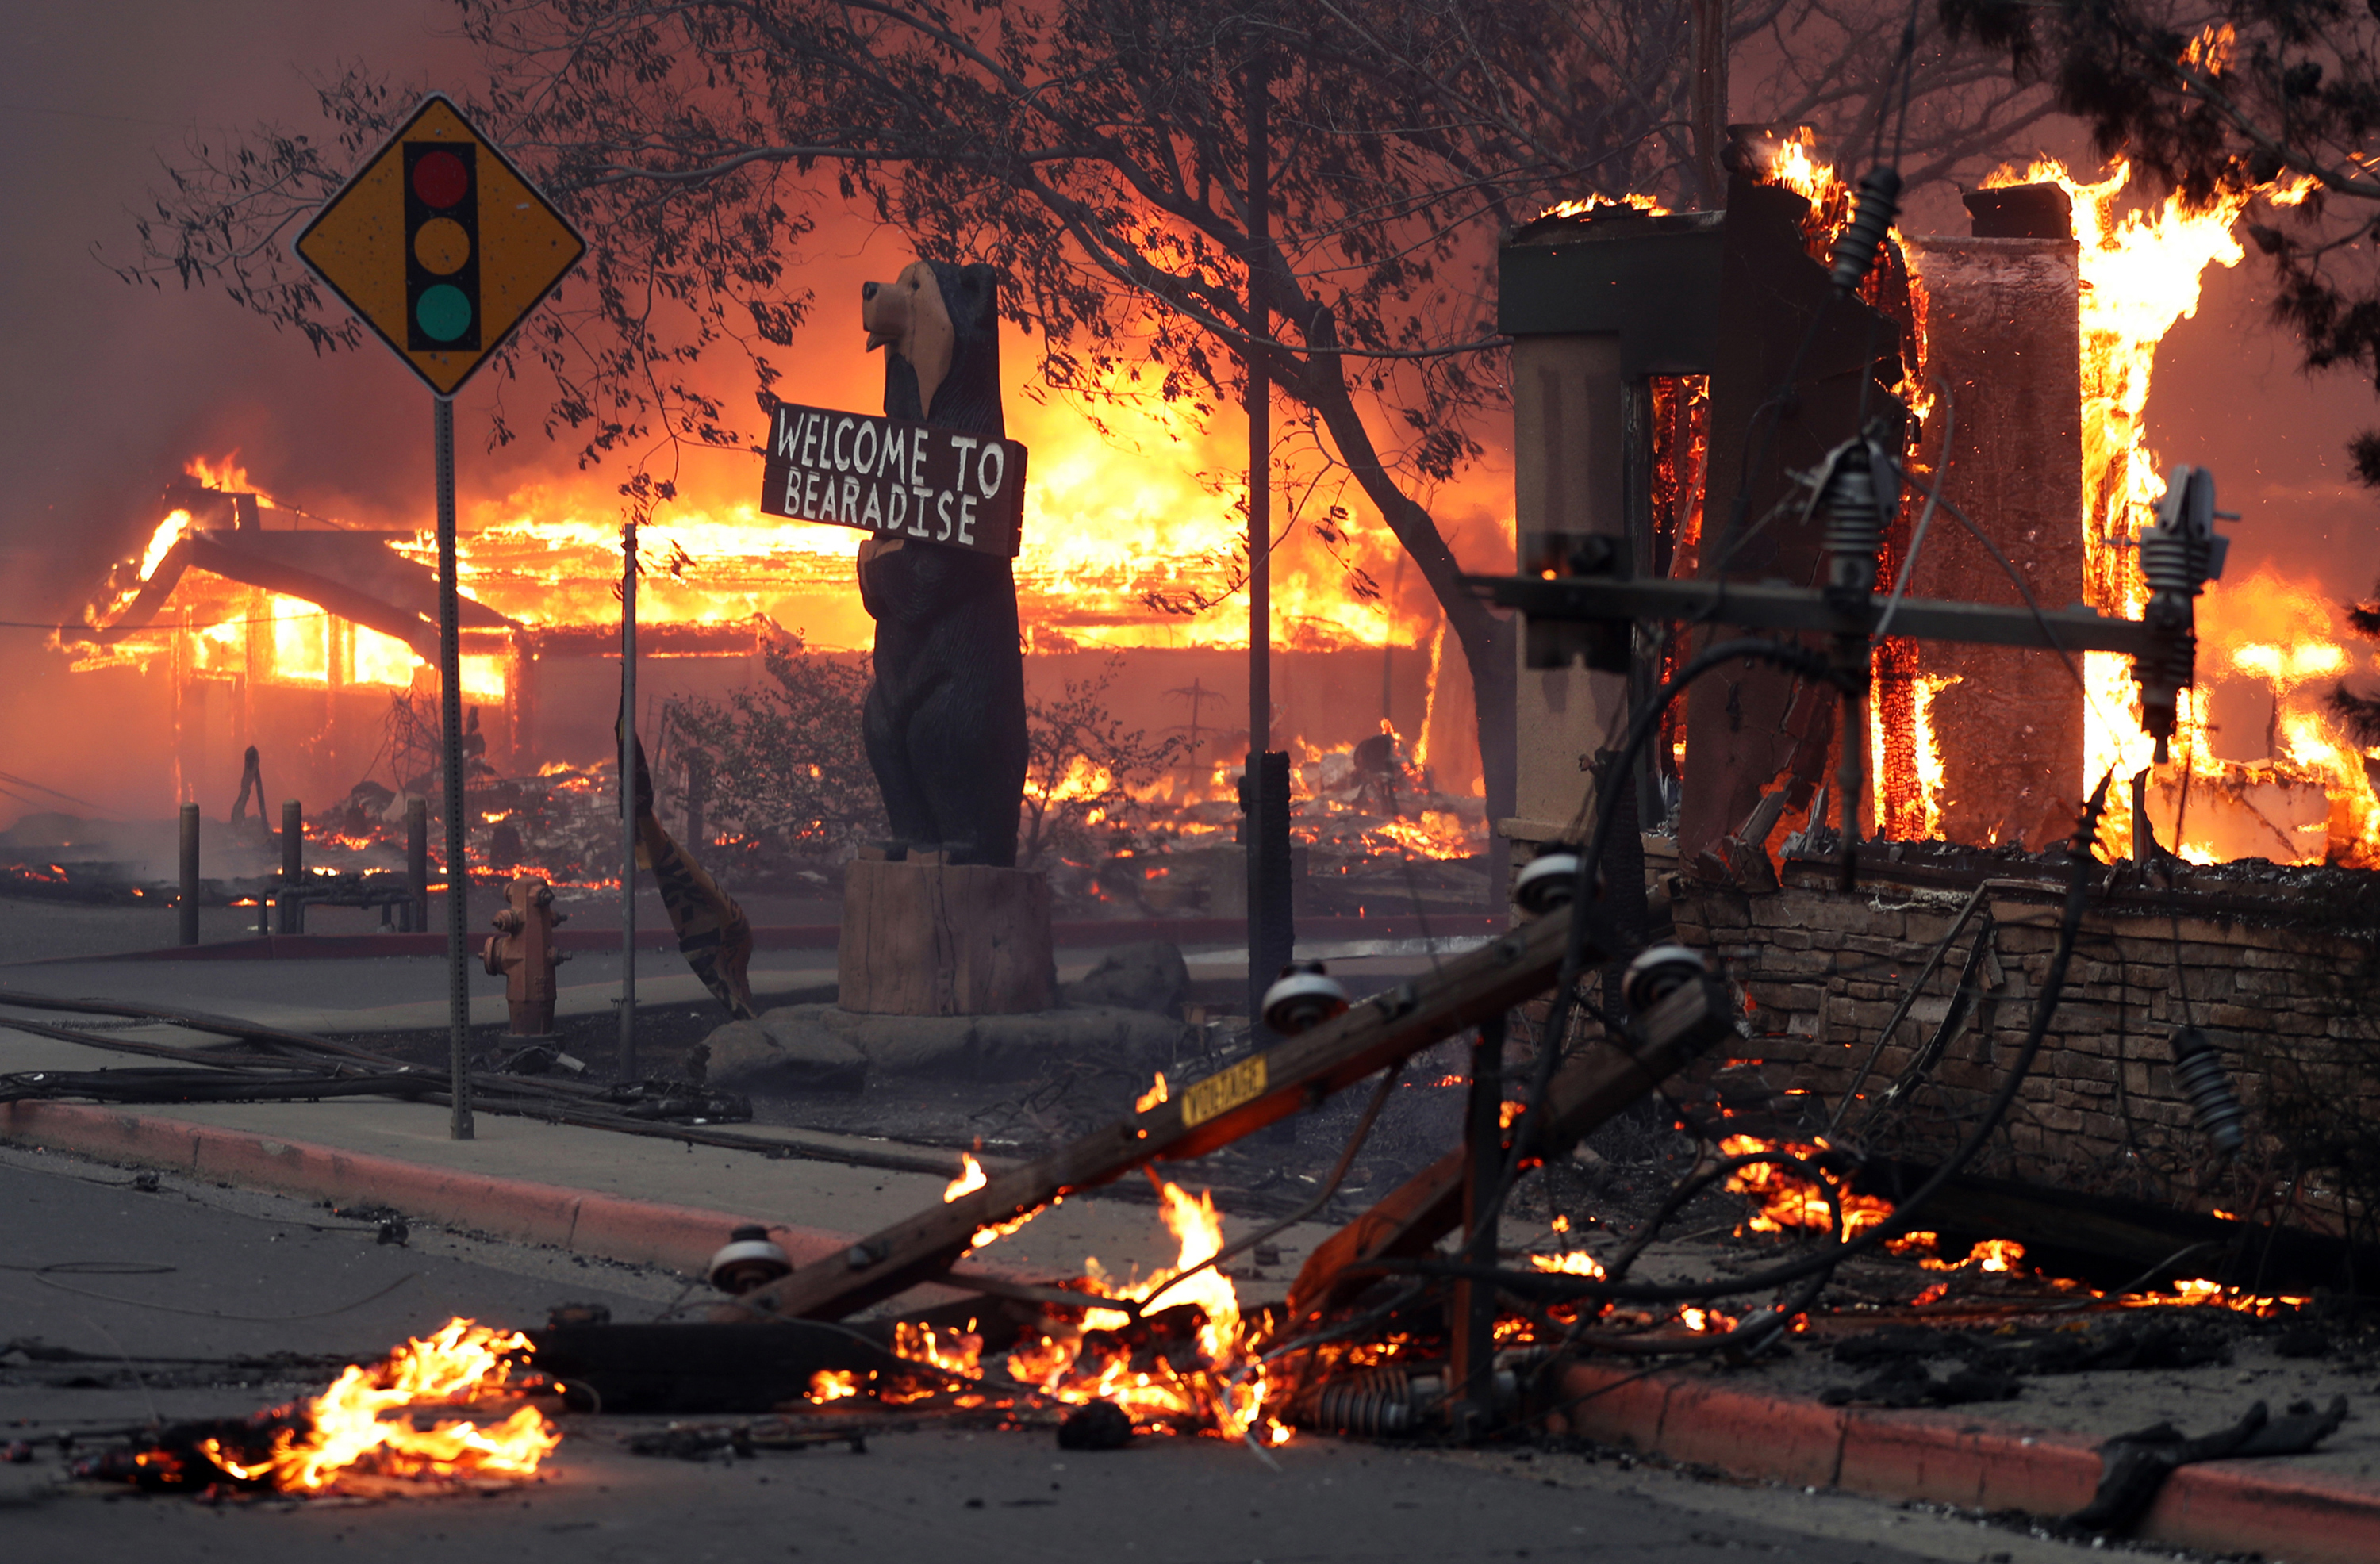 A Black Bear Diner and nearby businesses burn as the Camp Fire destroys a large portion of Paradise in Butte County, Calif.. on Thursday, November 8, 2018. (Hearst Newspapers via Getty Images; San Francisco Chronicle)